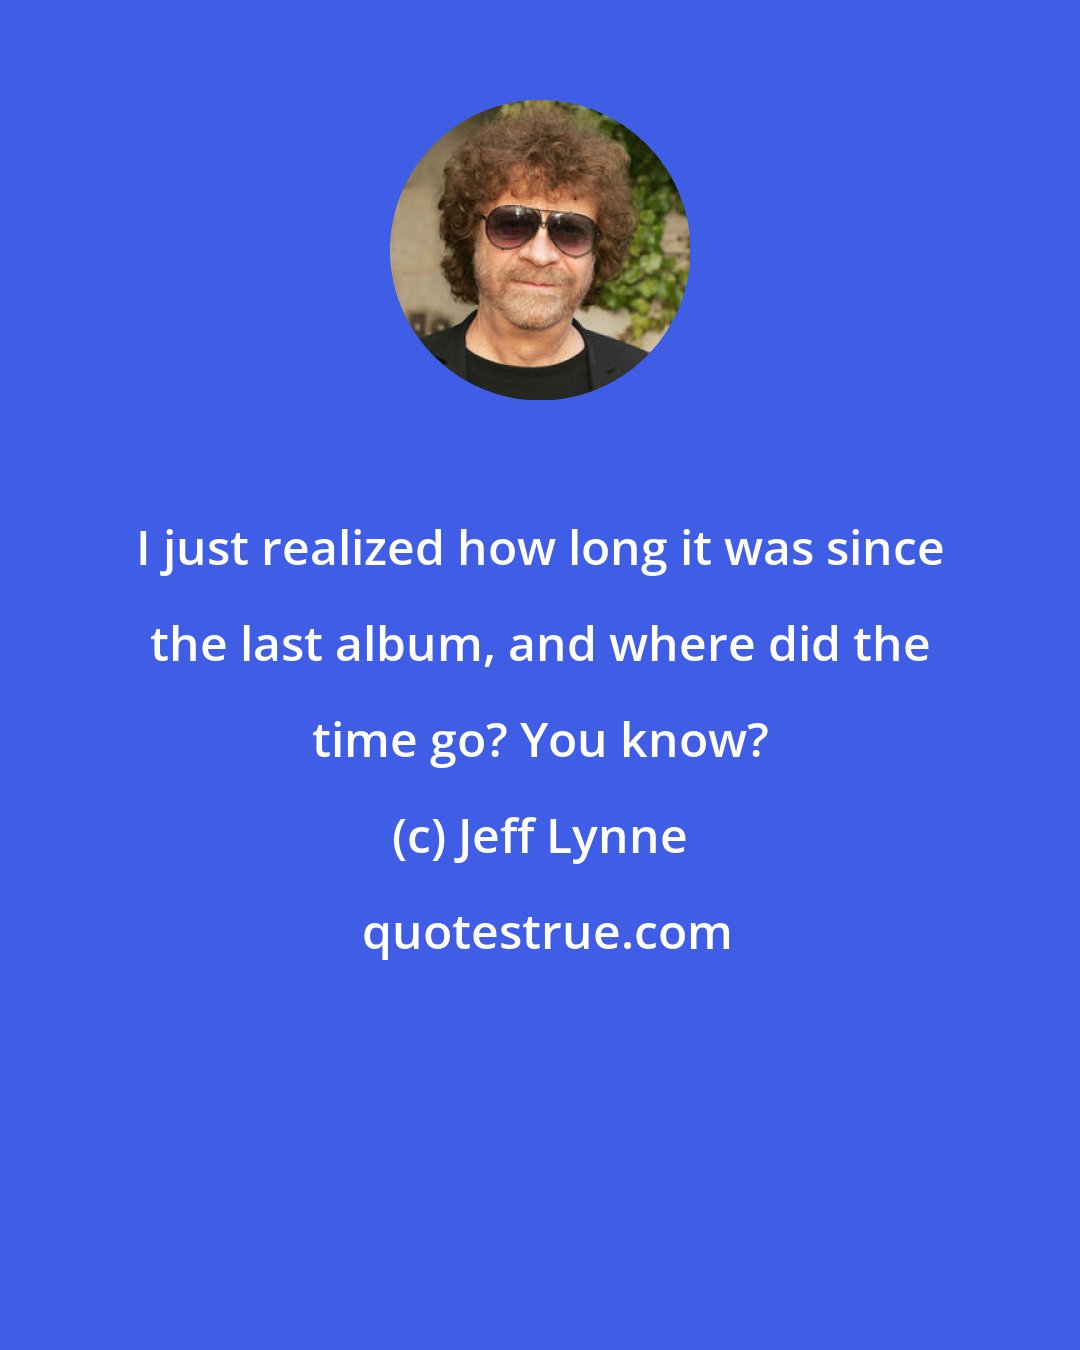 Jeff Lynne: I just realized how long it was since the last album, and where did the time go? You know?